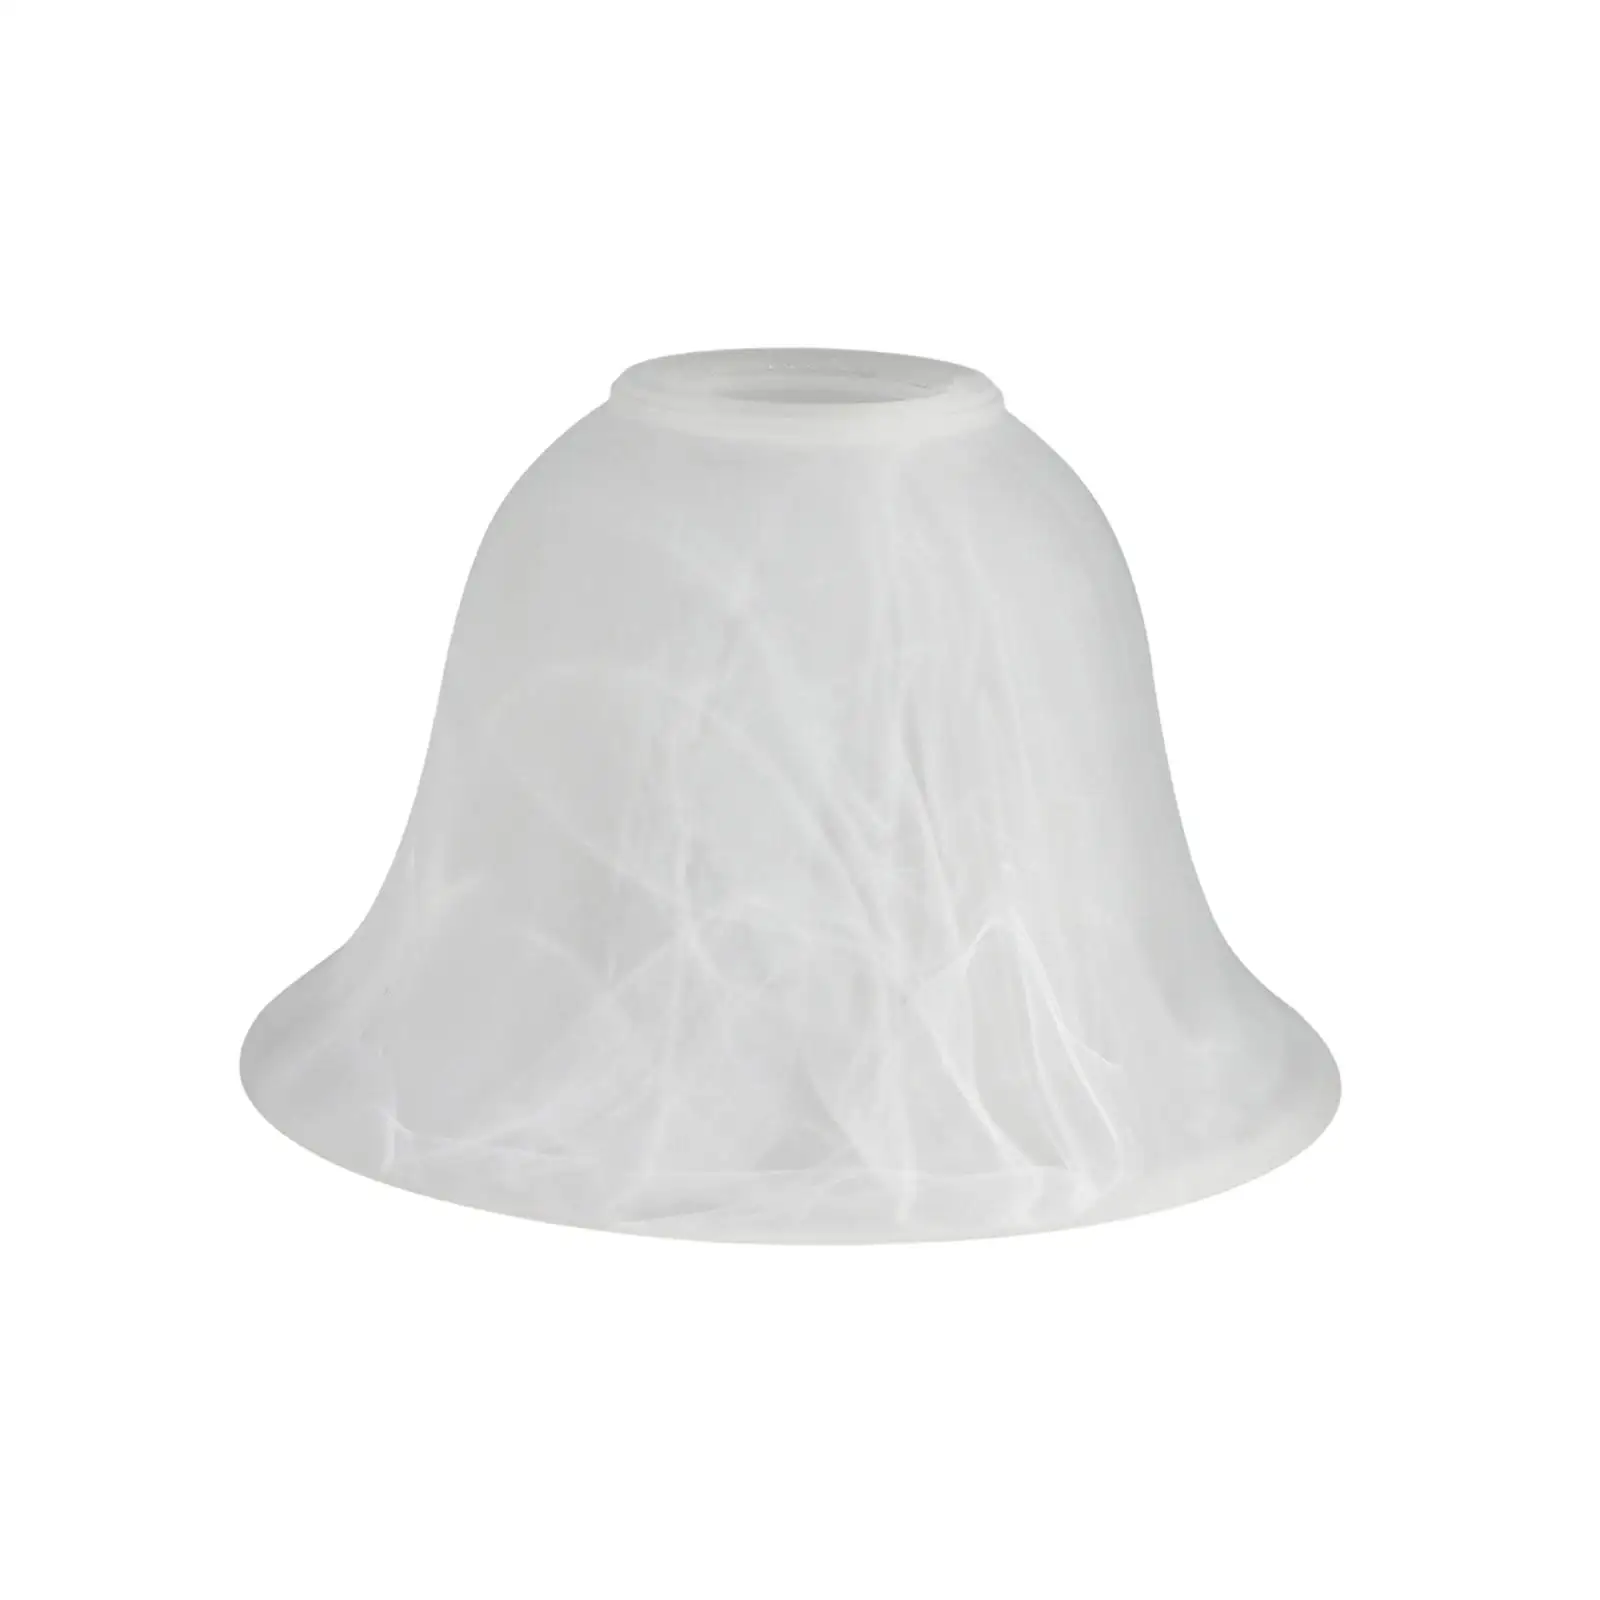 Minimalist Glass Lamp Shade Chandeliers Lampshade for Wedding Corridor Cafe